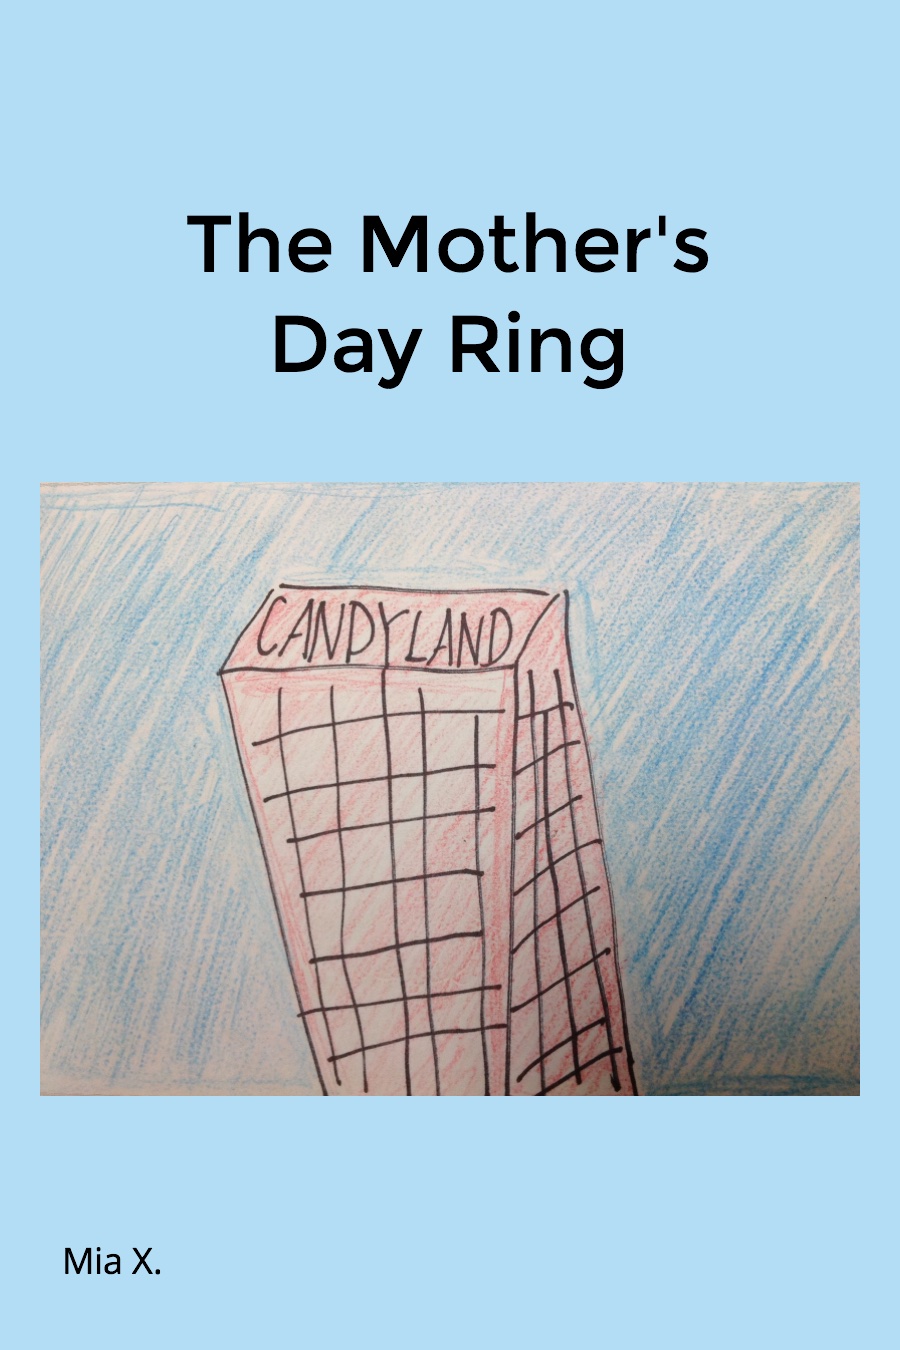 The Mother’s Day Ring by Mia X